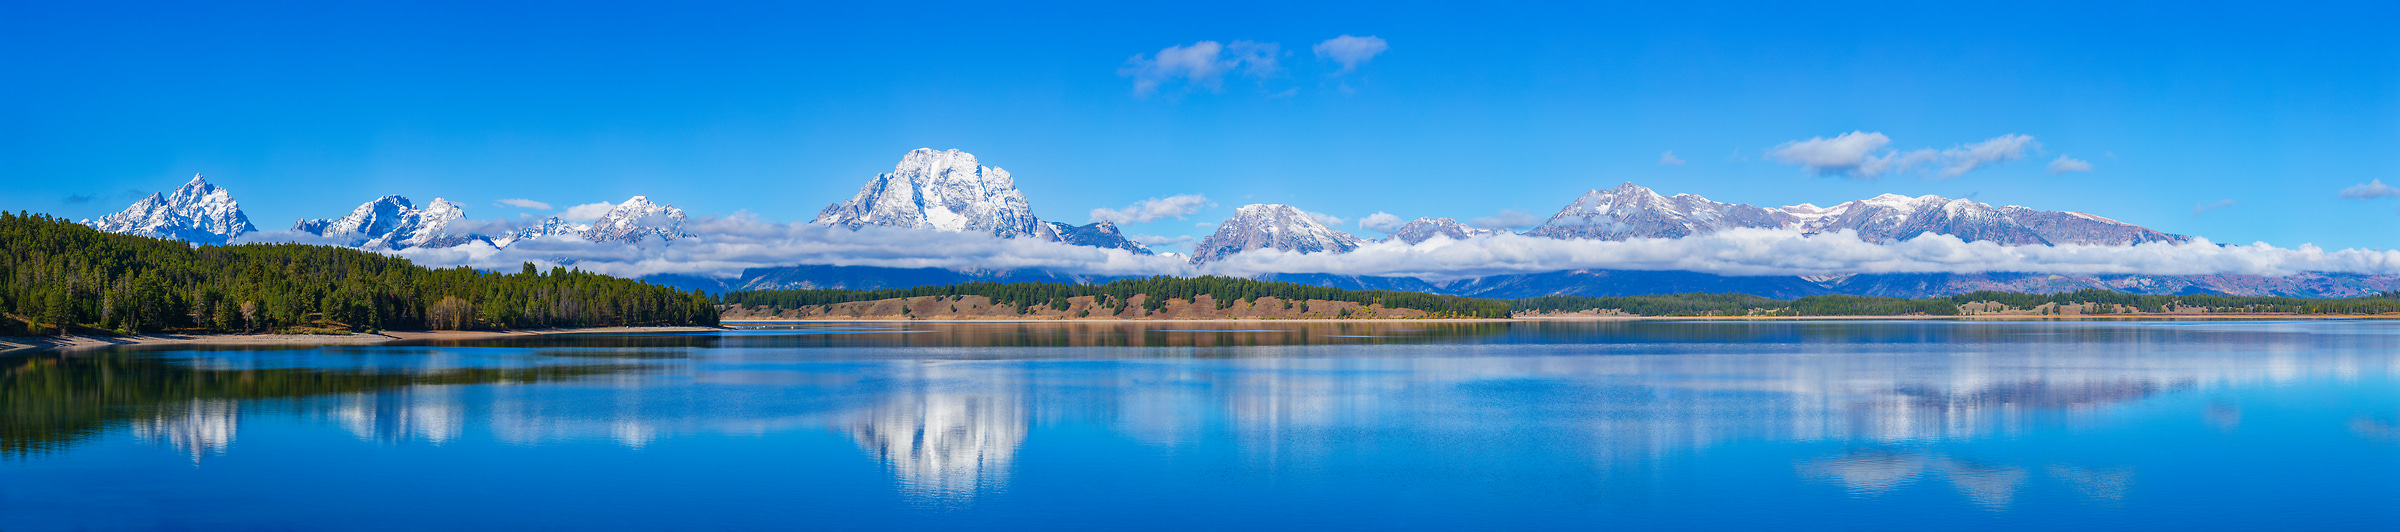 530 megapixels! A very high resolution, large-format mural photo of a mountain range and a lake; landscape photograph created by John Freeman in Jackson Lake, Grand Tetons National Park, Wyoming.